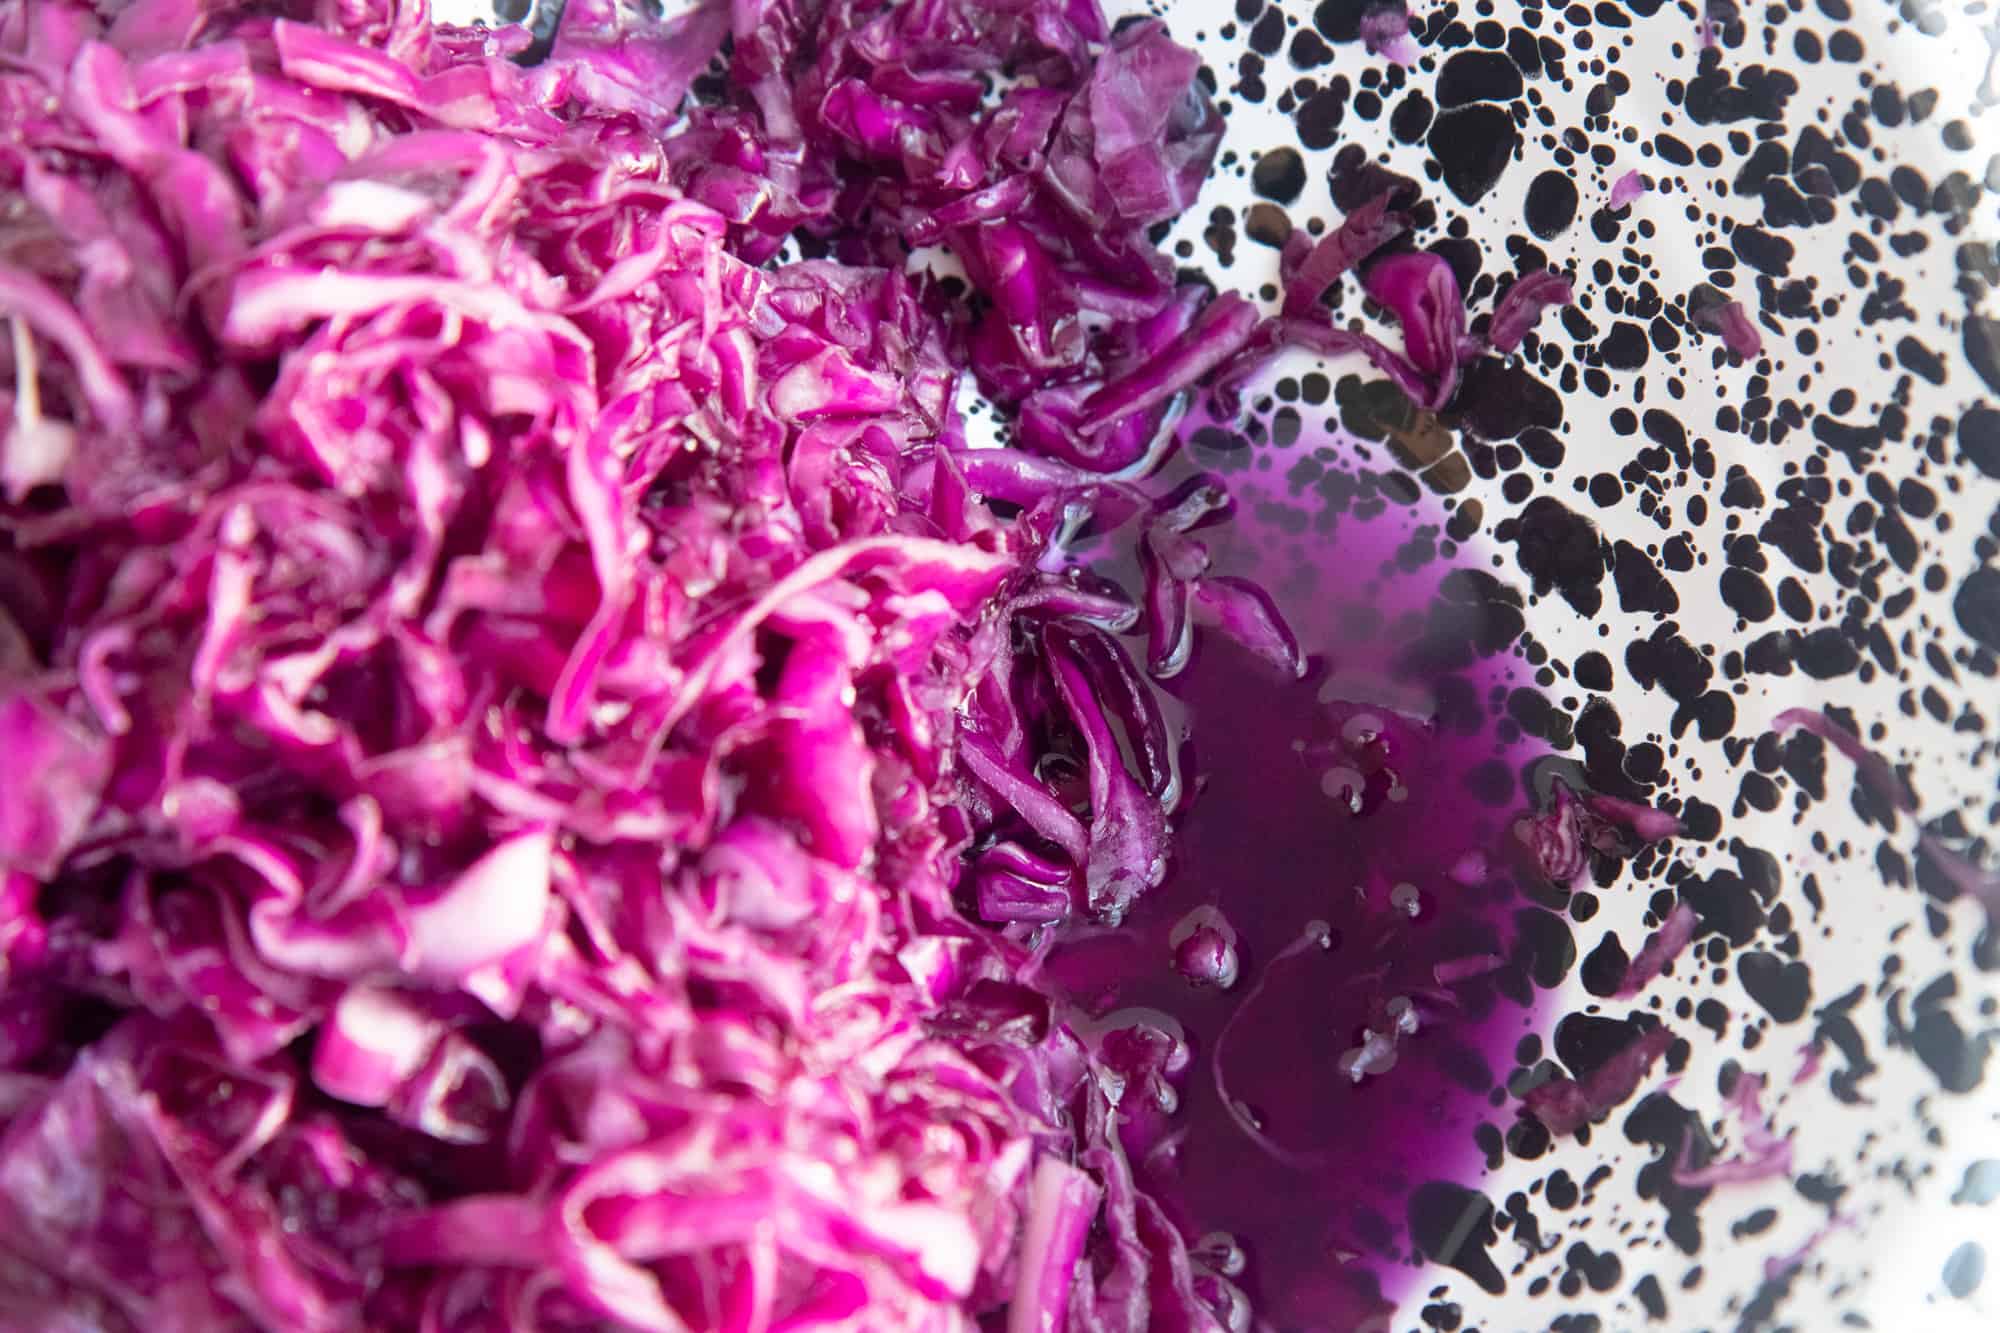 Sliced red cabbage sits in a pool of brine as a step towards making homemade sauerkraut.